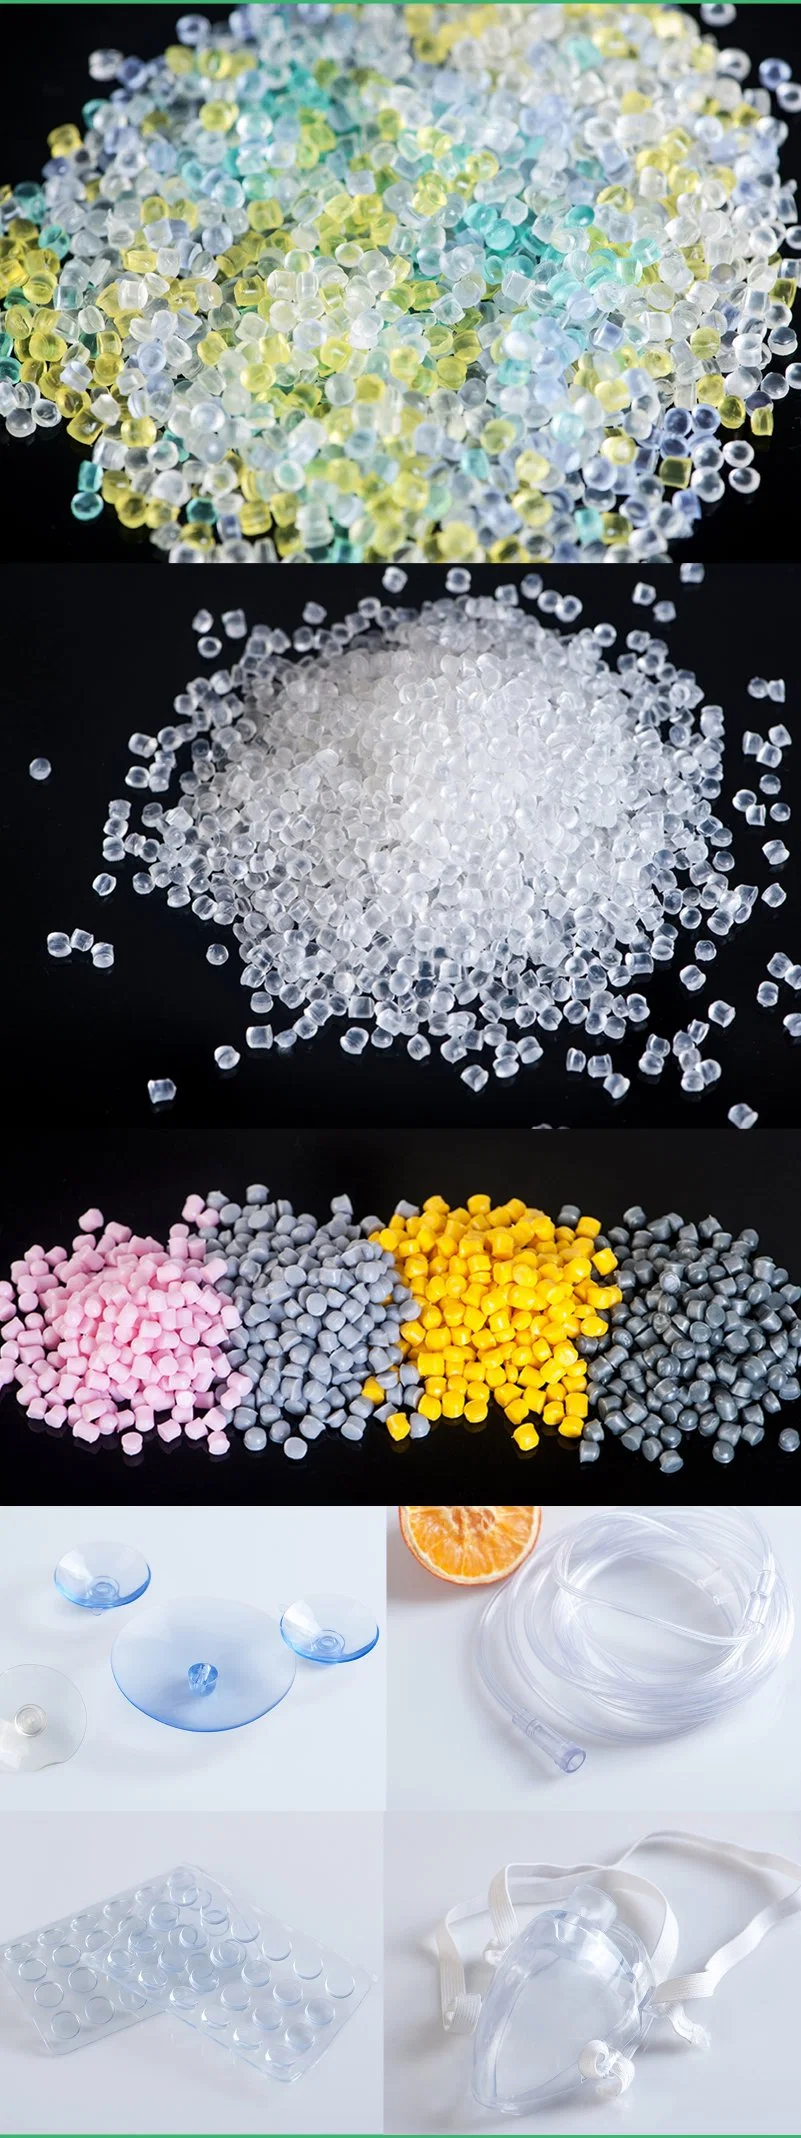 Raw Material PVC Granules for Injection Molding Productions